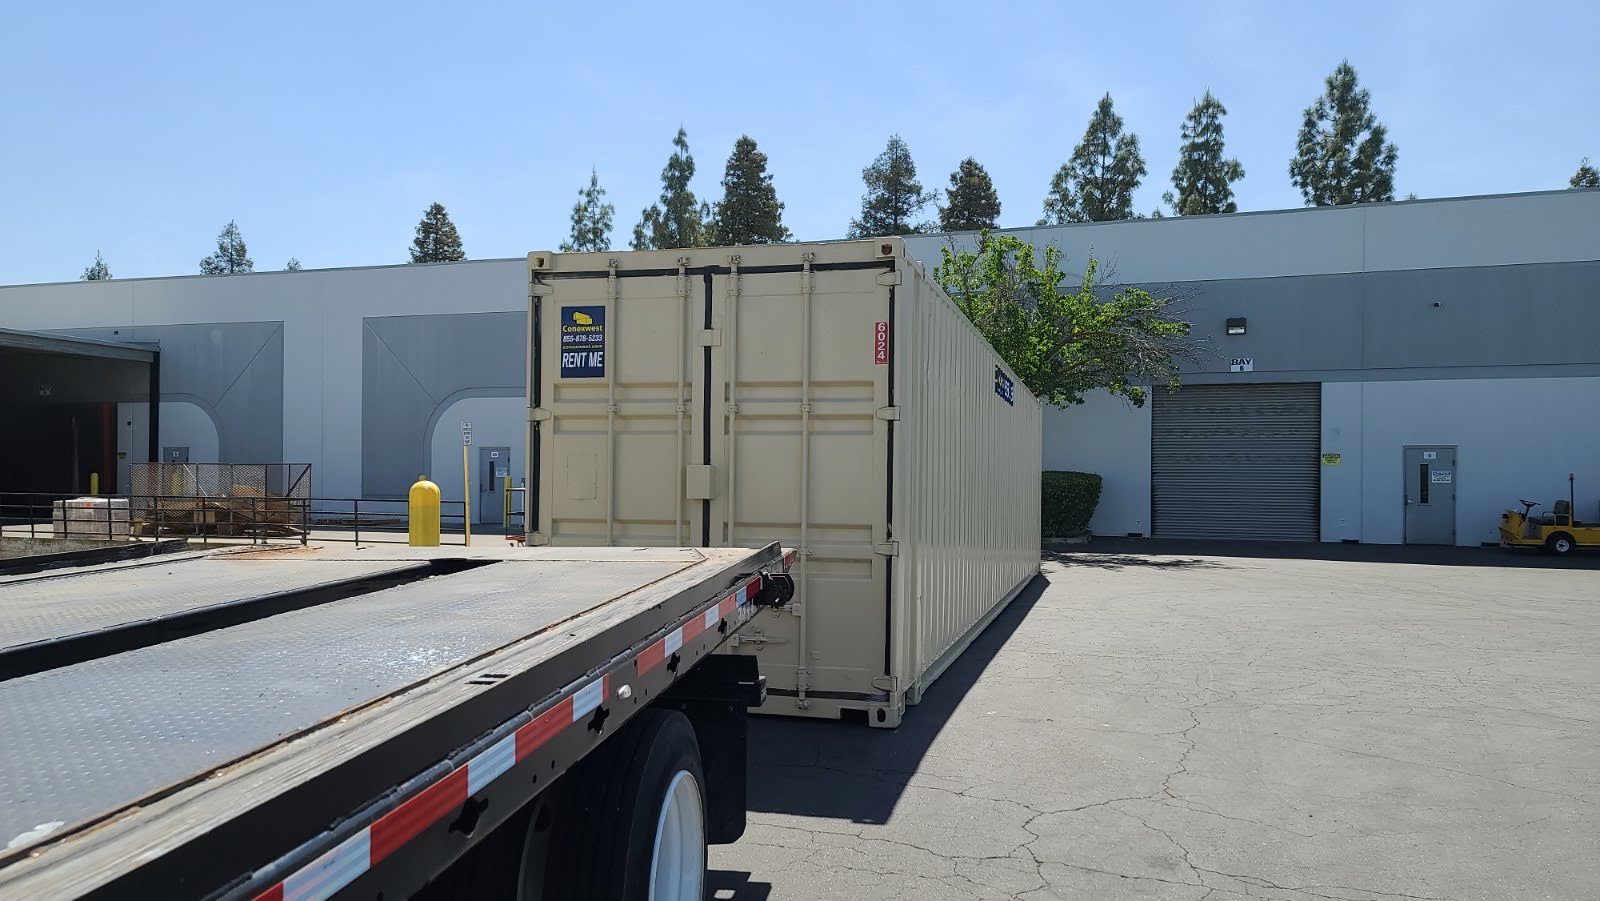 Rent 40ft storage containers near me | Conexwest